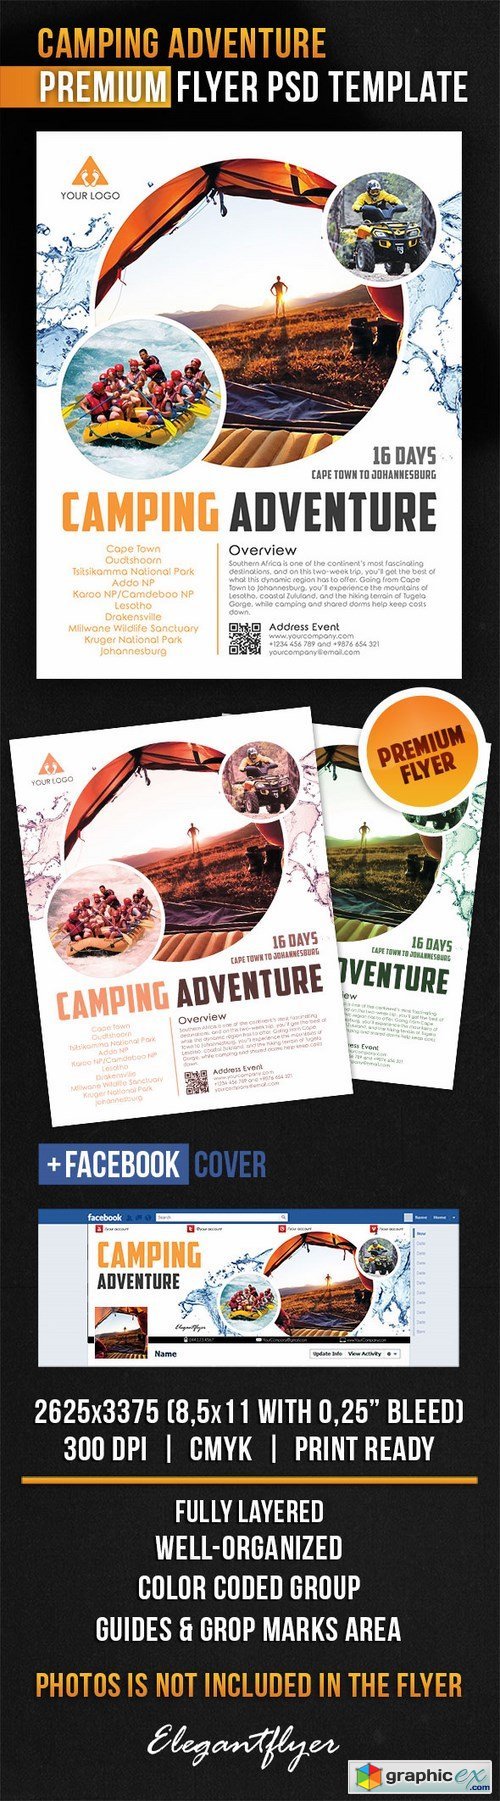 Camping Adventure  Flyer PSD Template + Facebook Cover